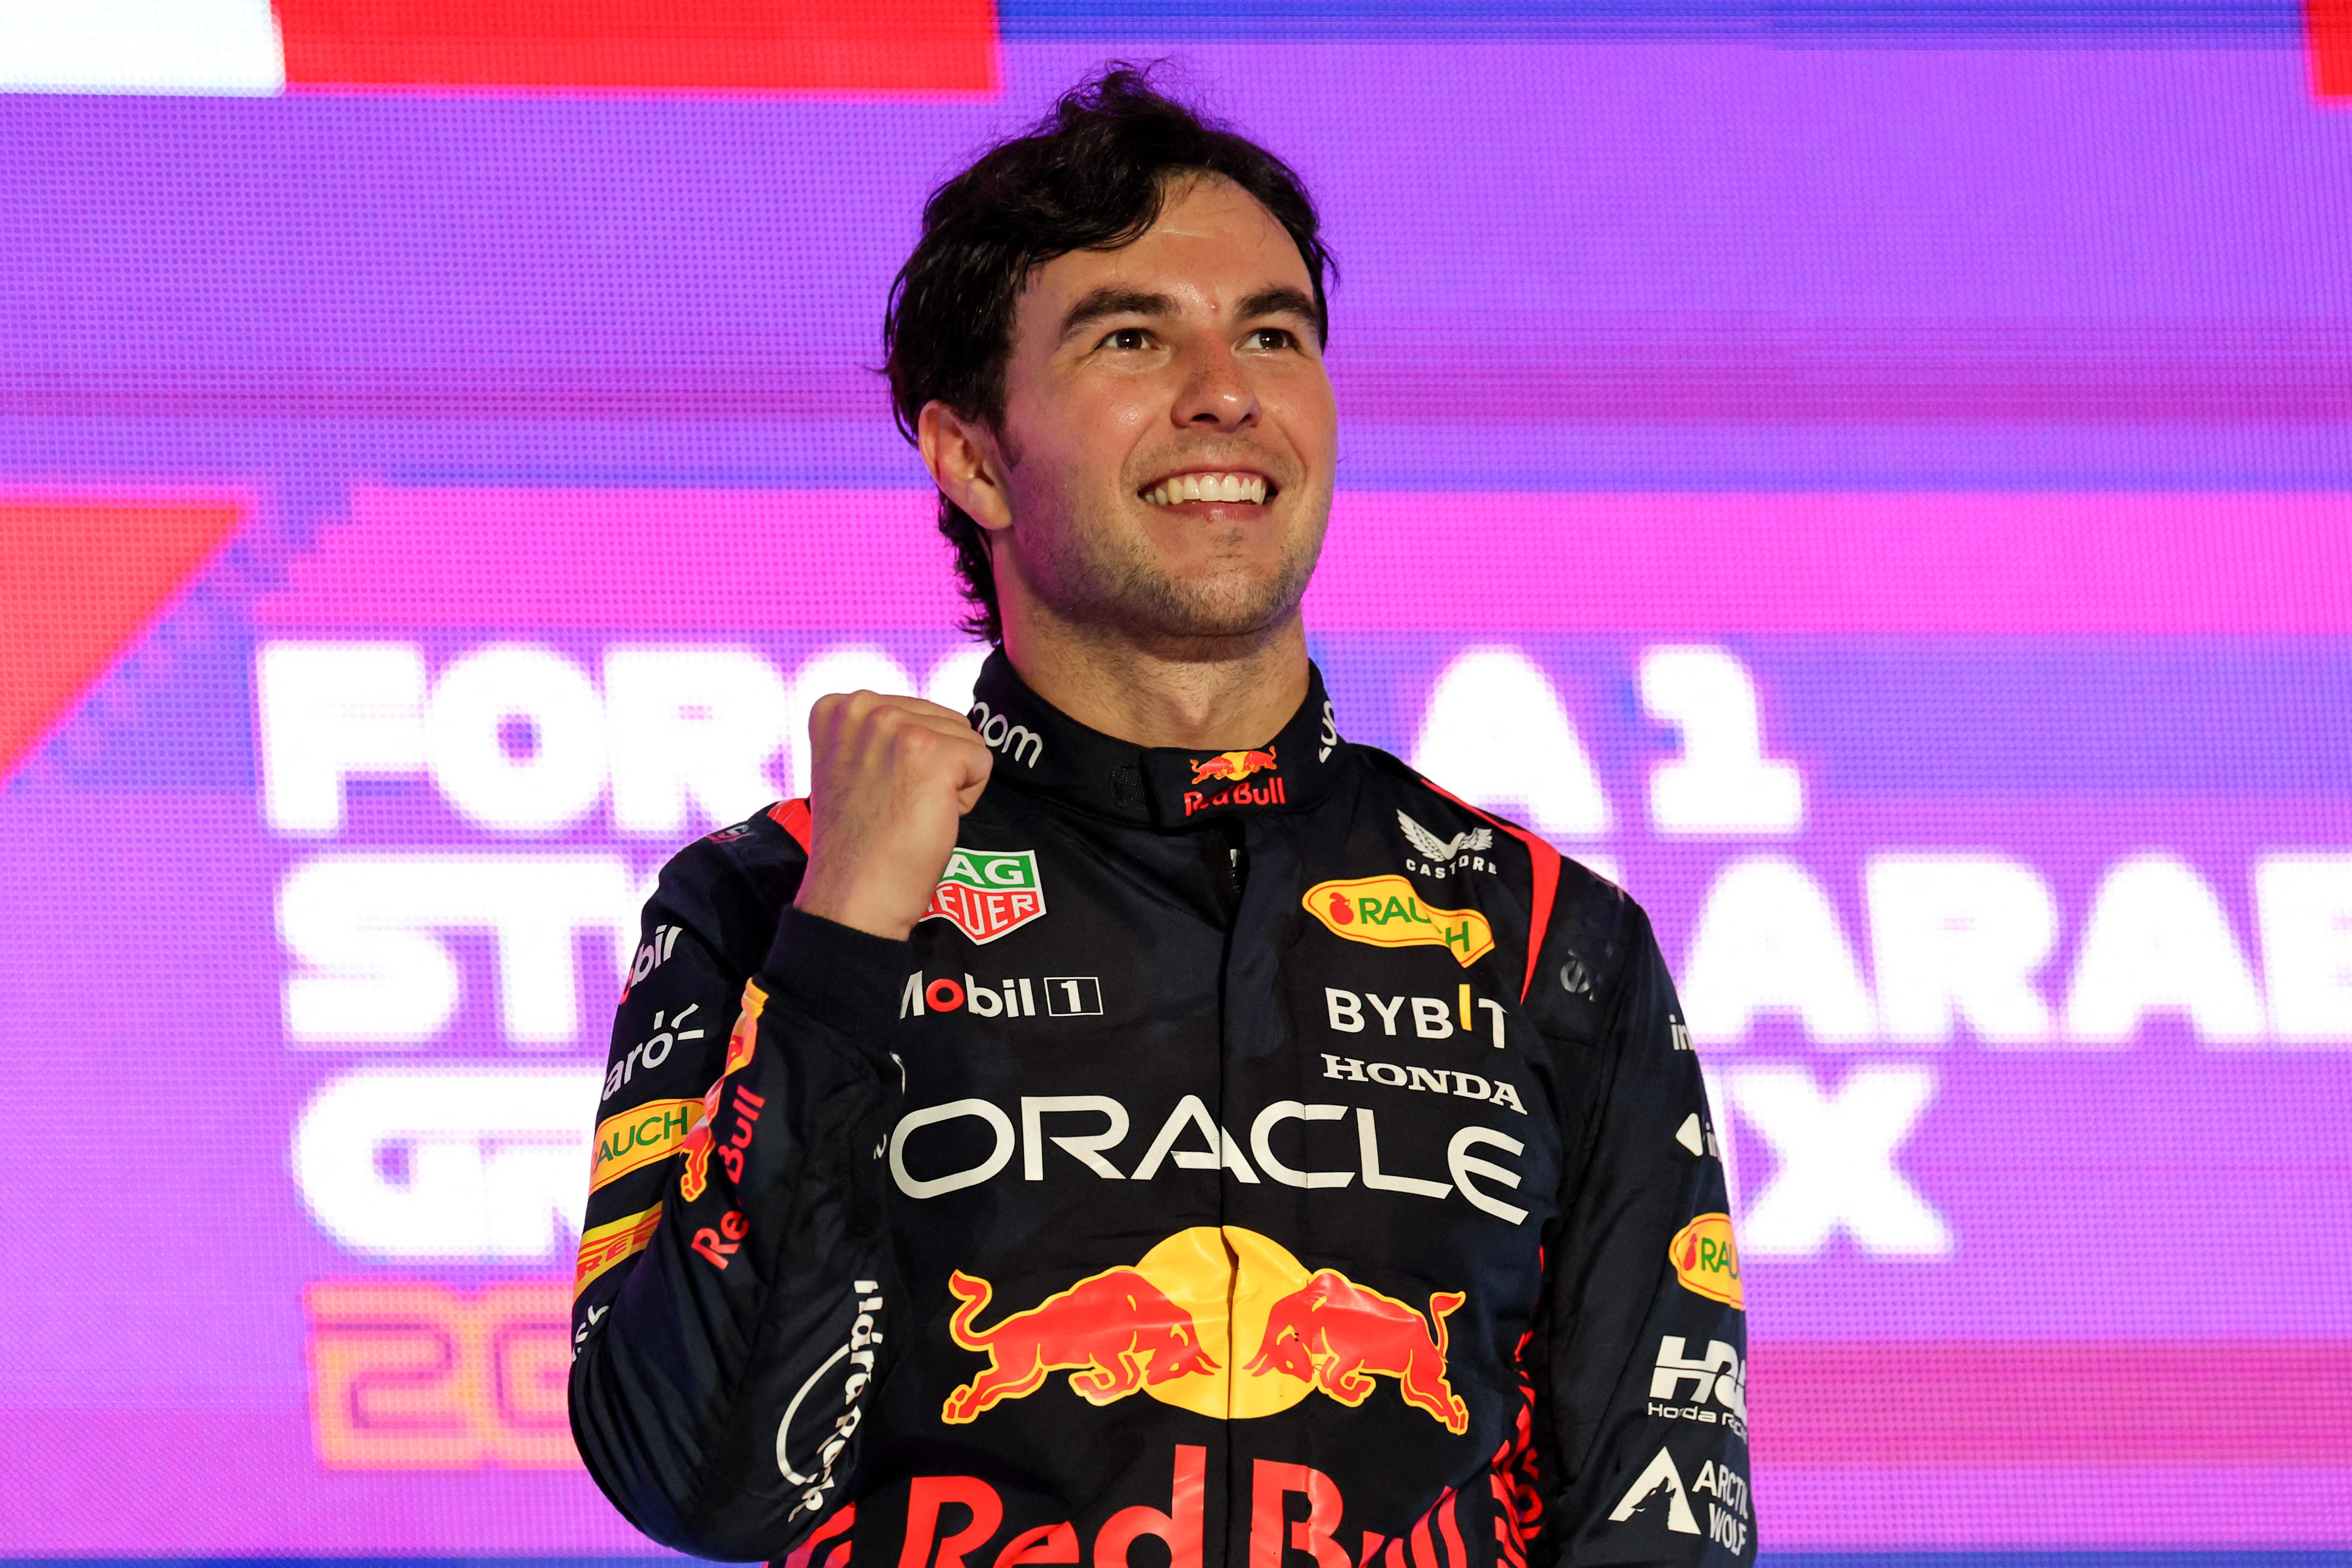 Red Bull Racing's Mexican driver Sergio Perez celebrates on the podium after winning the Saudi Arabia Formula One Grand Prix at the Jeddah Corniche Circuit in Jeddah on March 19, 2023. (Photo by Giuseppe CACACE / AFP)